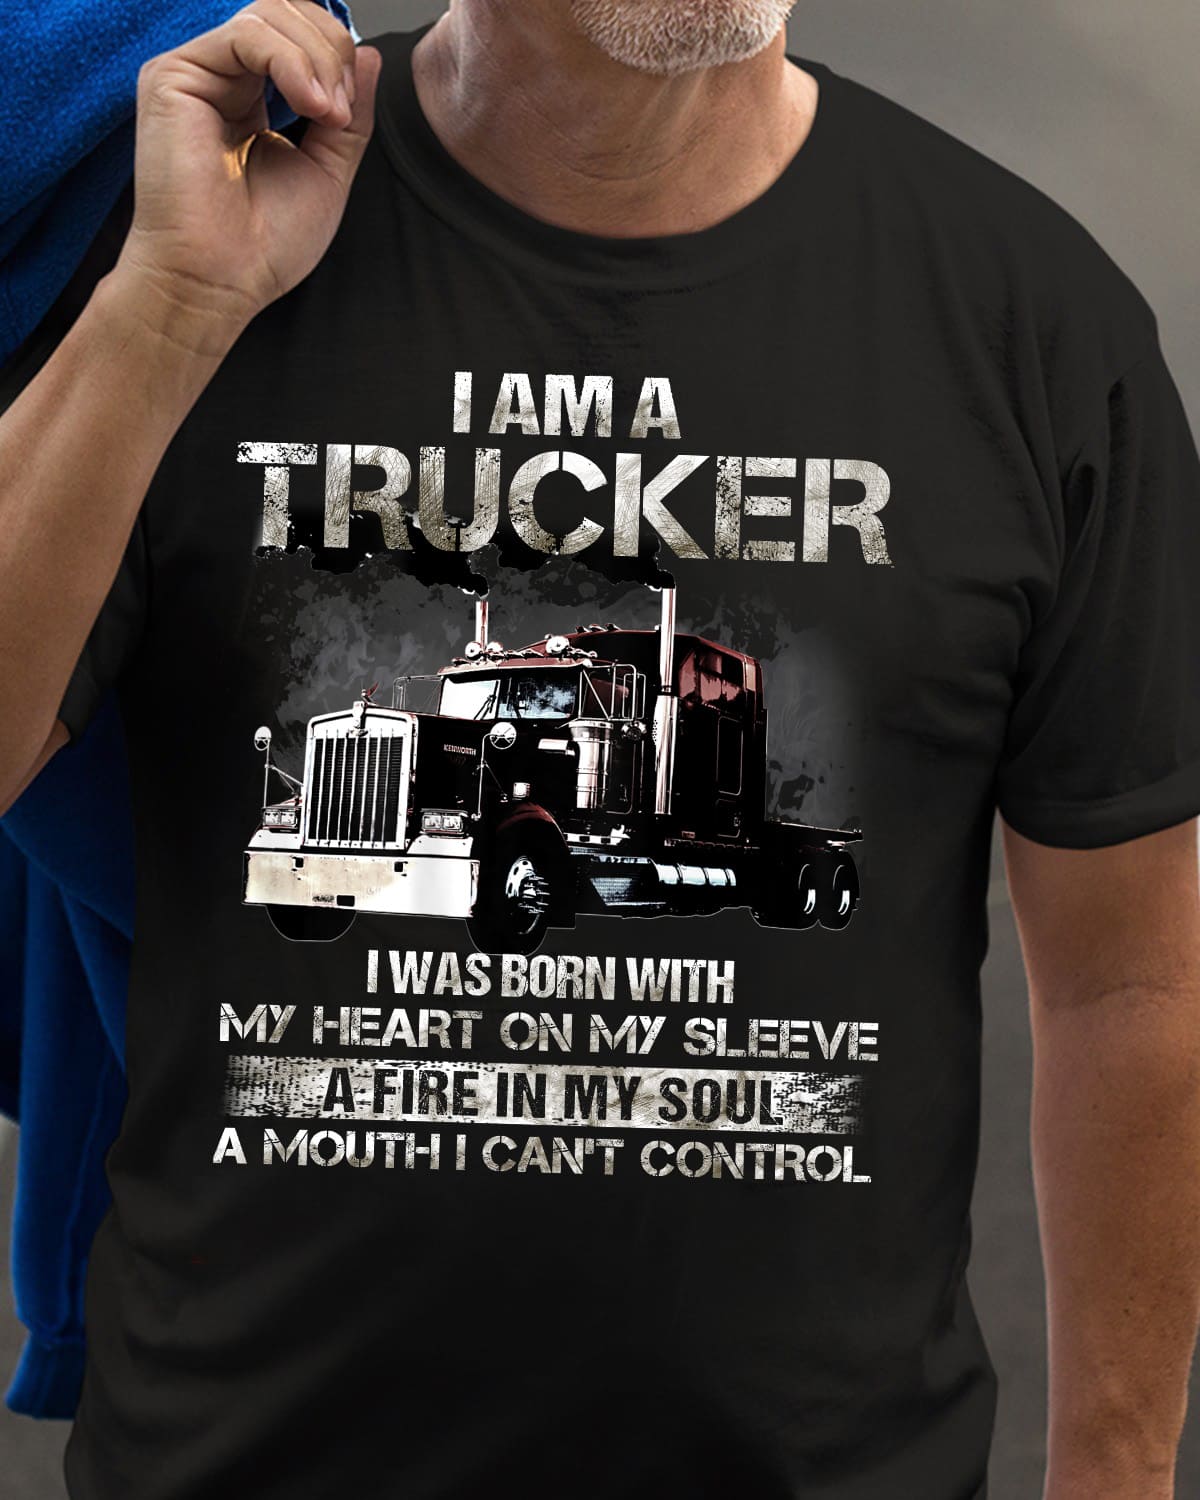 Truck Graphic T-shirt - I am a trucker i was born with my heart on my sleeve a fire in my soul a mouth i can't control